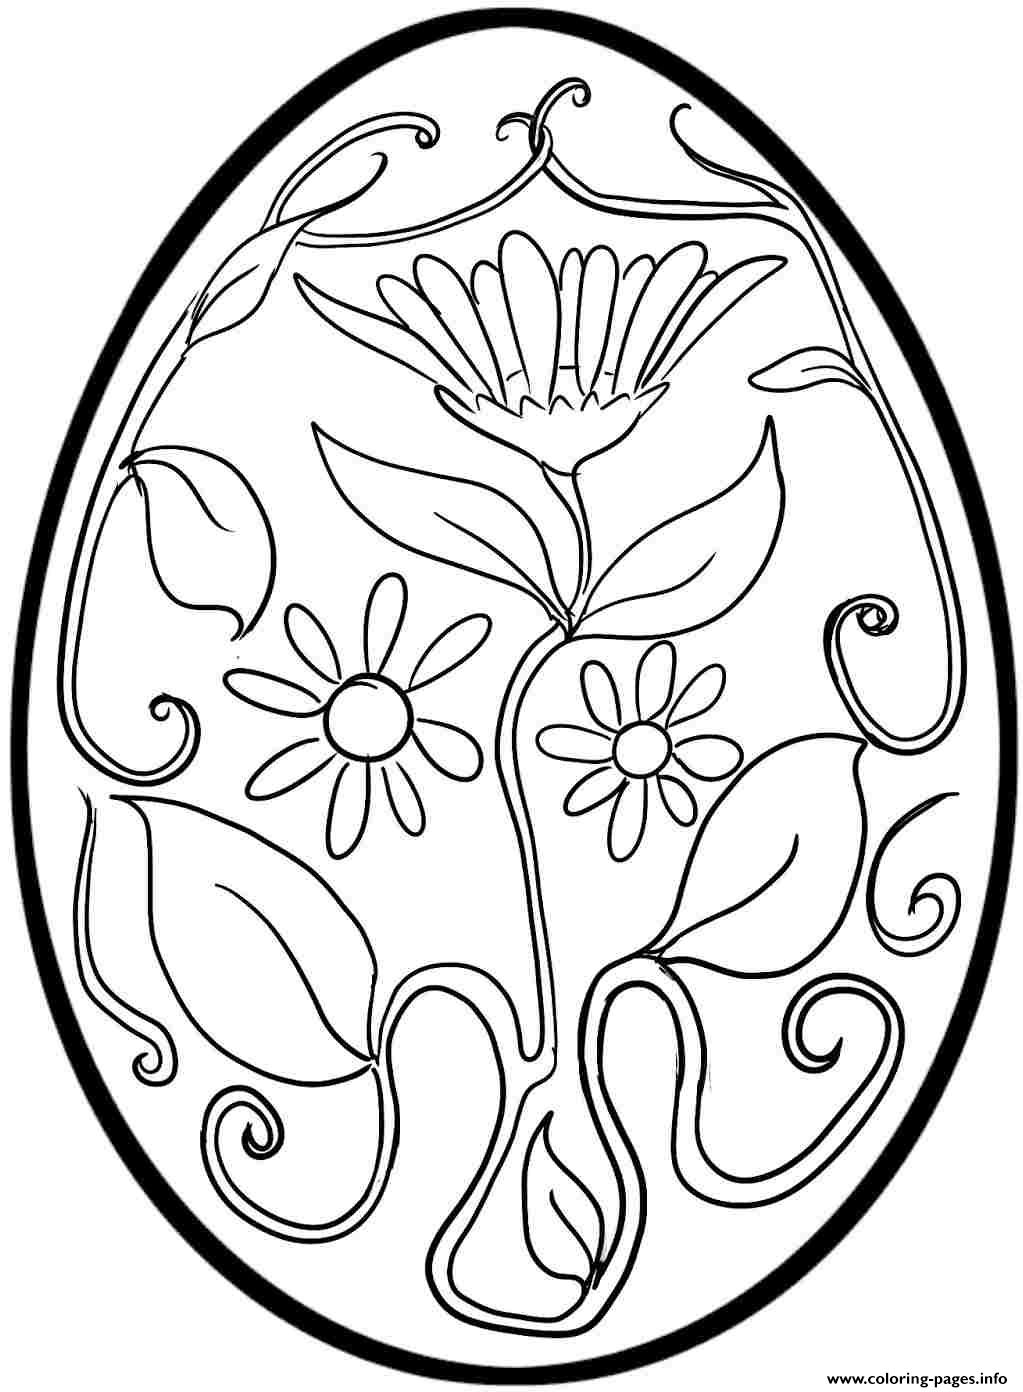  Easter Egg Colouring Pages For Adults PNG Coloring